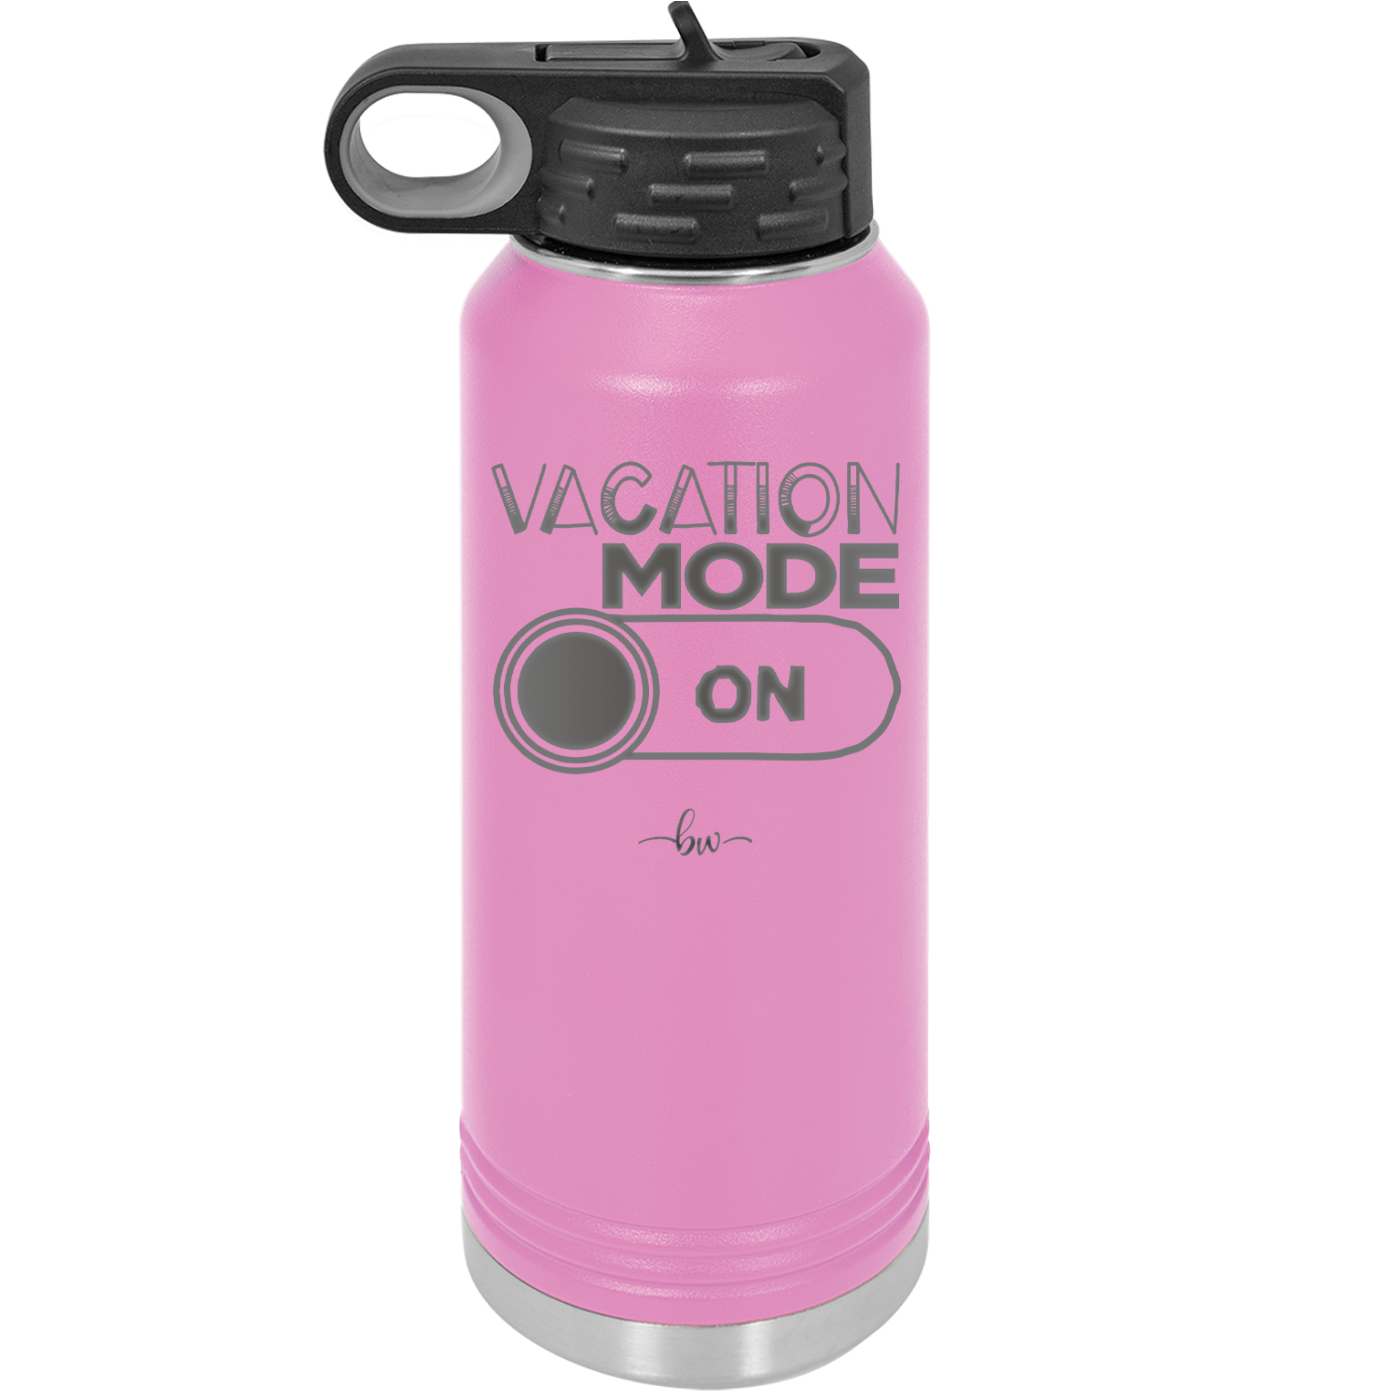 Vacaton Mode ON - Laser Engraved Stainless Steel Drinkware - 1958 -